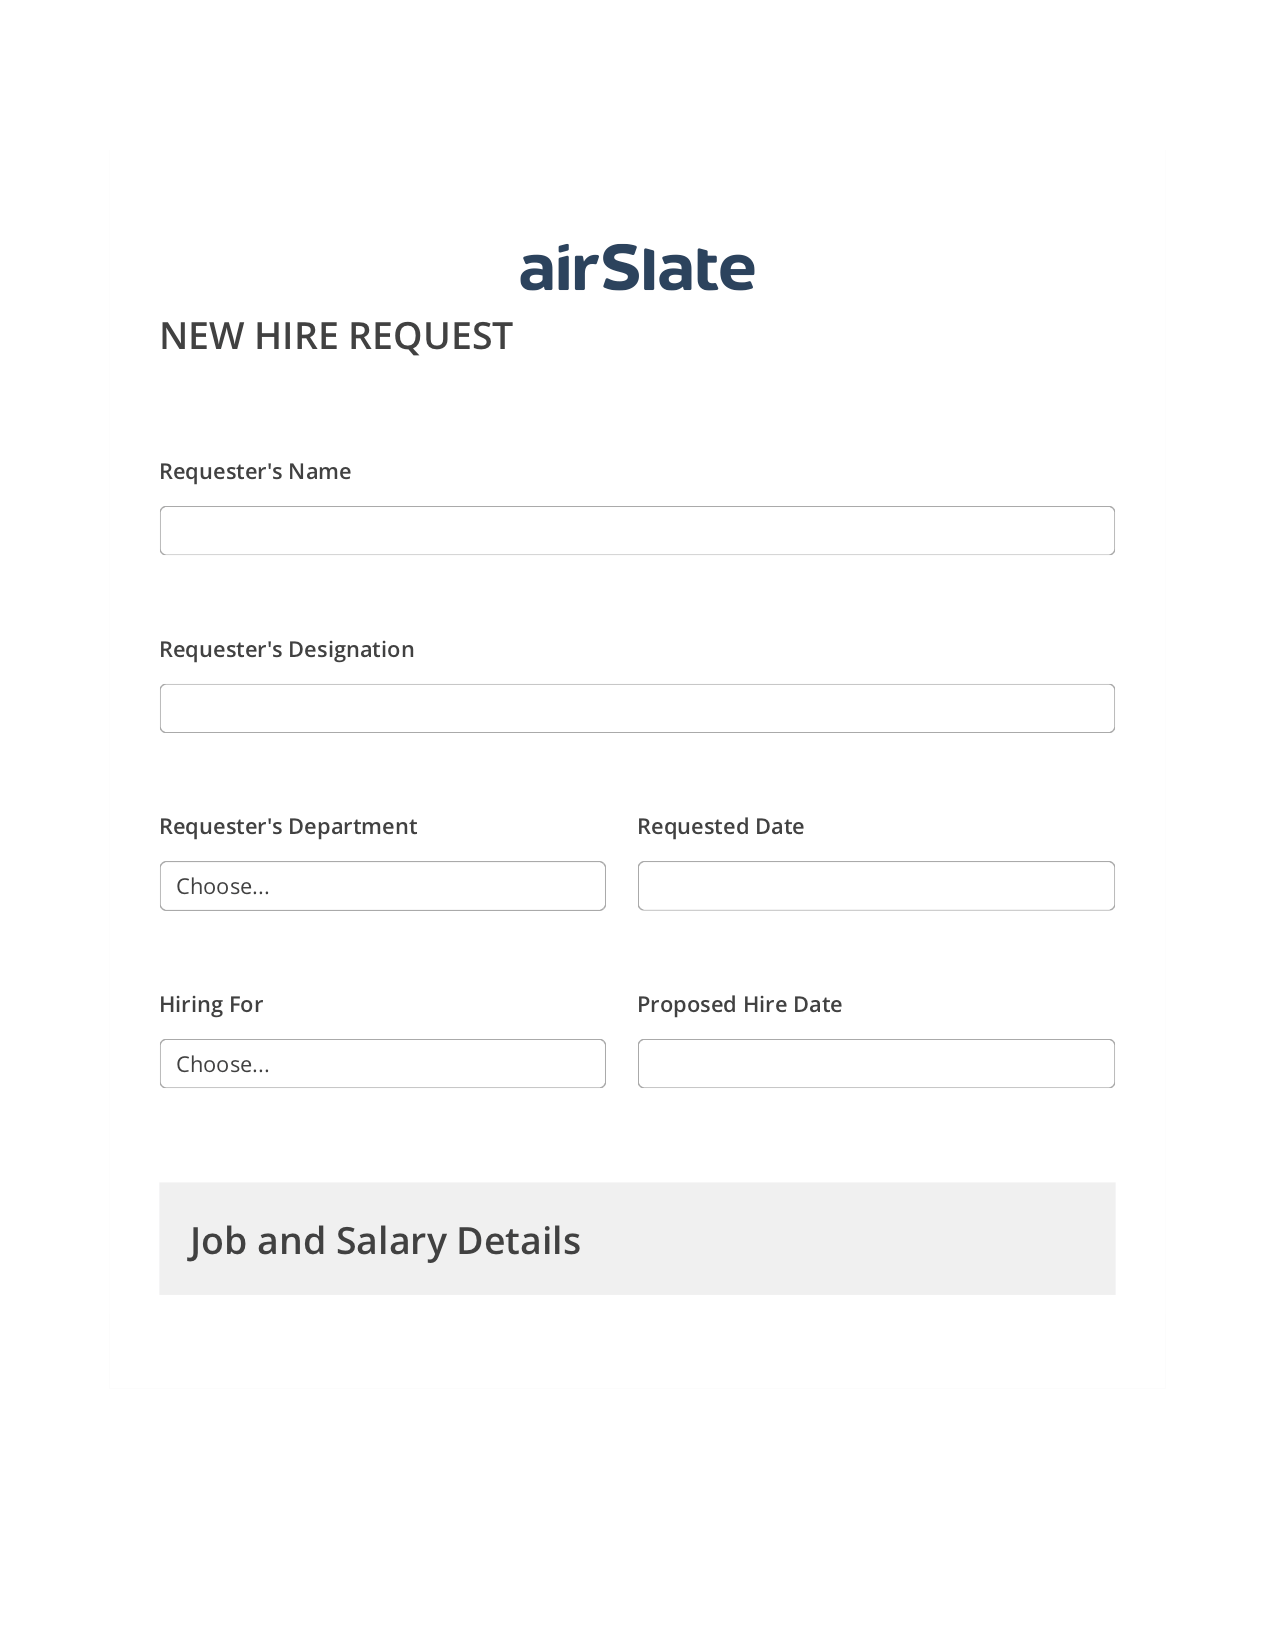 Hiring Request Workflow Pre-fill from CSV File Bot, Revoke Access Bot, Post-finish Document Bot